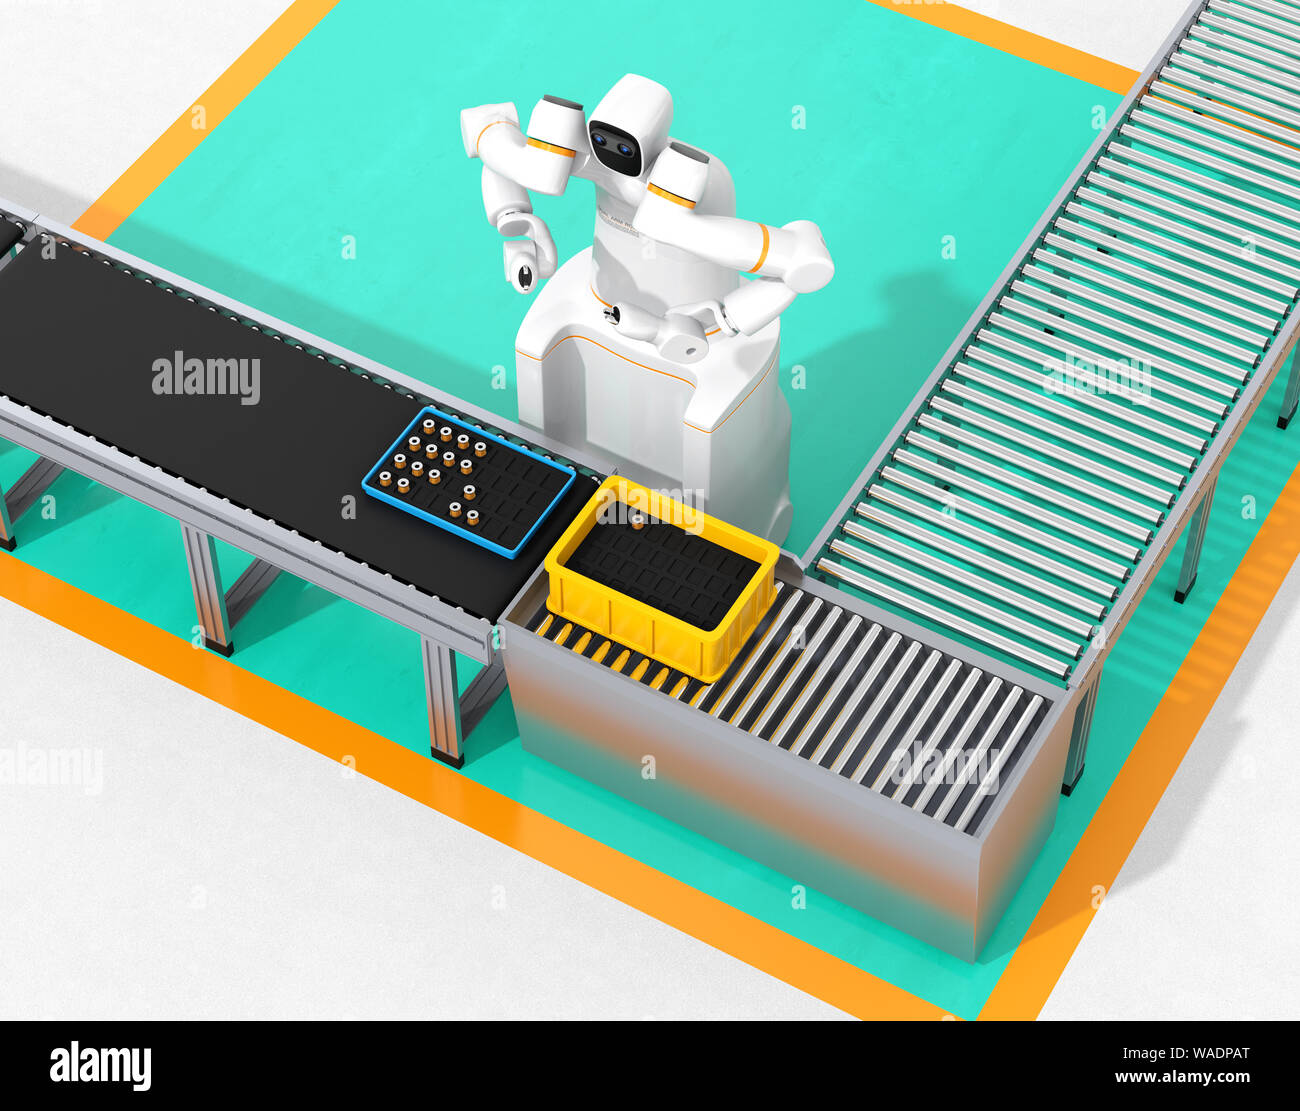 Dual-arm robot assembly motor coils in cell-production space. Collaborative robot concept. Original design. 3D rendering image. Stock Photo